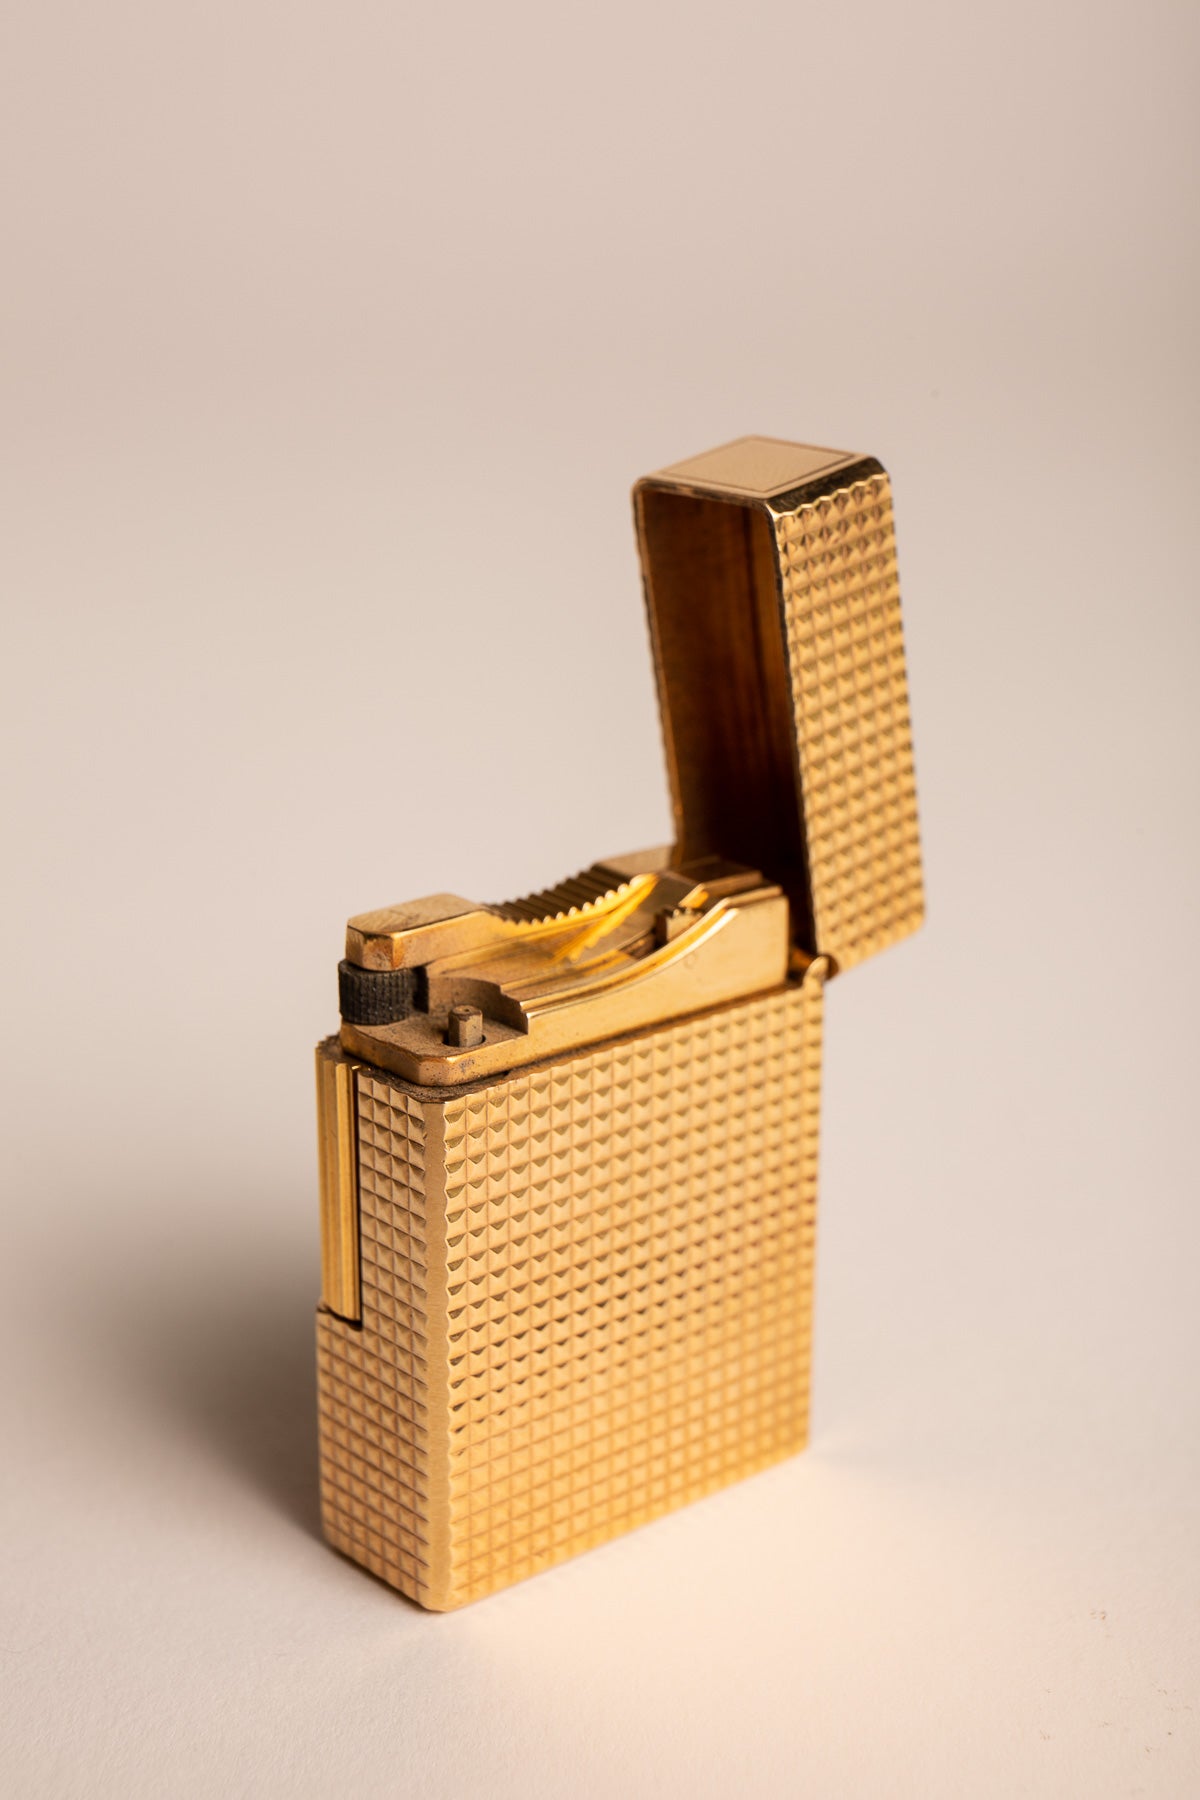 MAXFIELD PRIVATE COLLECTION | VINTAGE DUPONT STUD LIGHTER